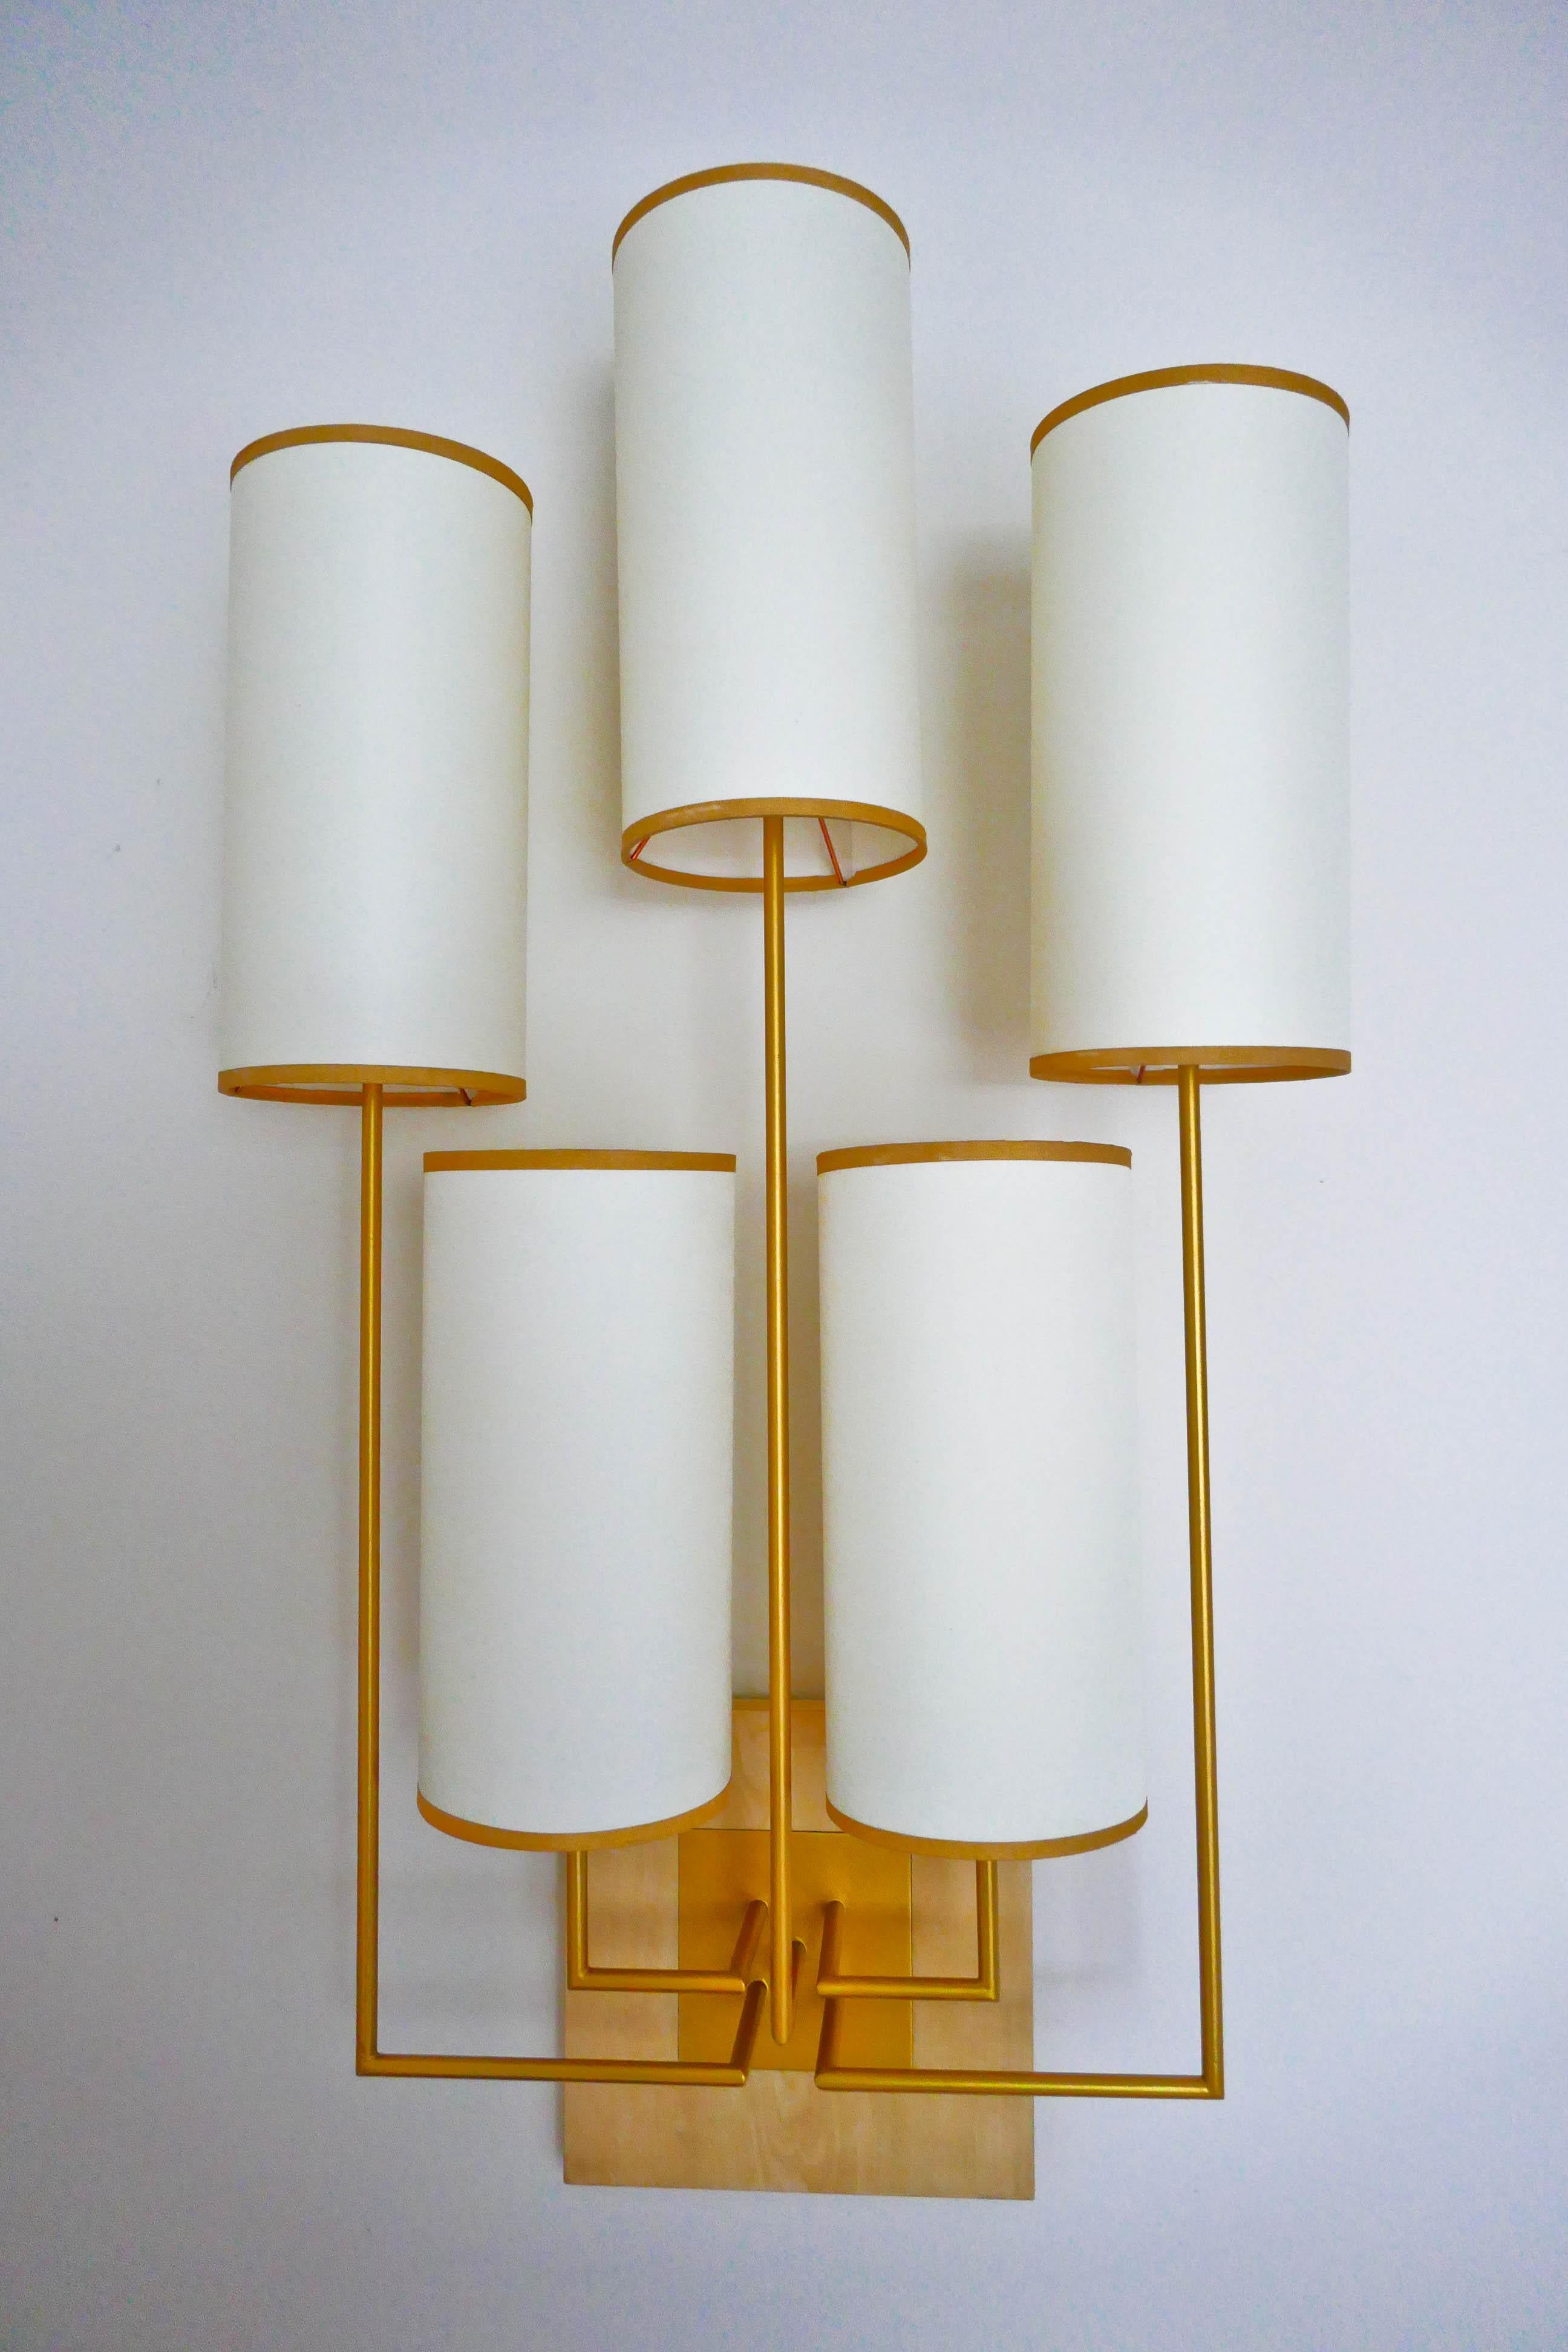 Modern Wall Light, Sconce in Gold Patina and Chestnut Wood